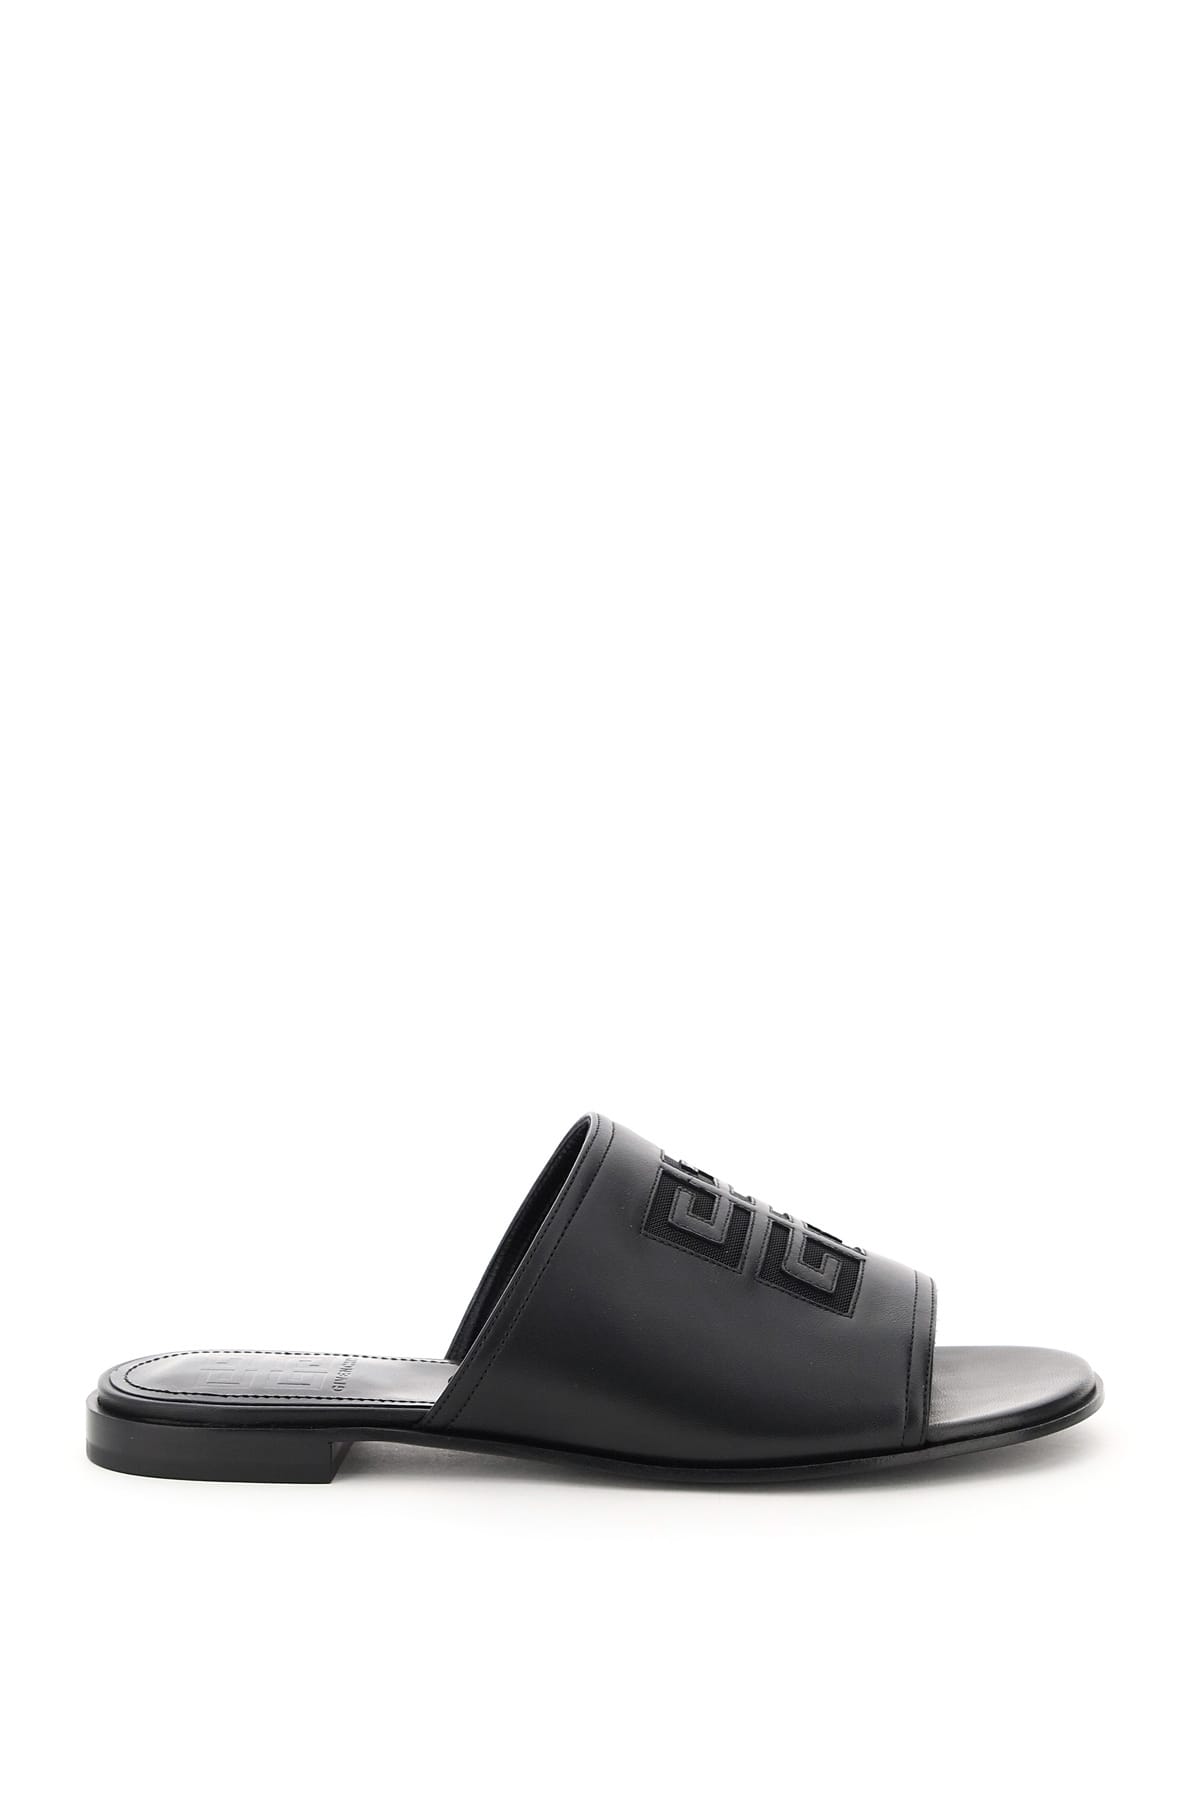 Buy Givenchy 4g Logo Mules online, shop Givenchy shoes with free shipping